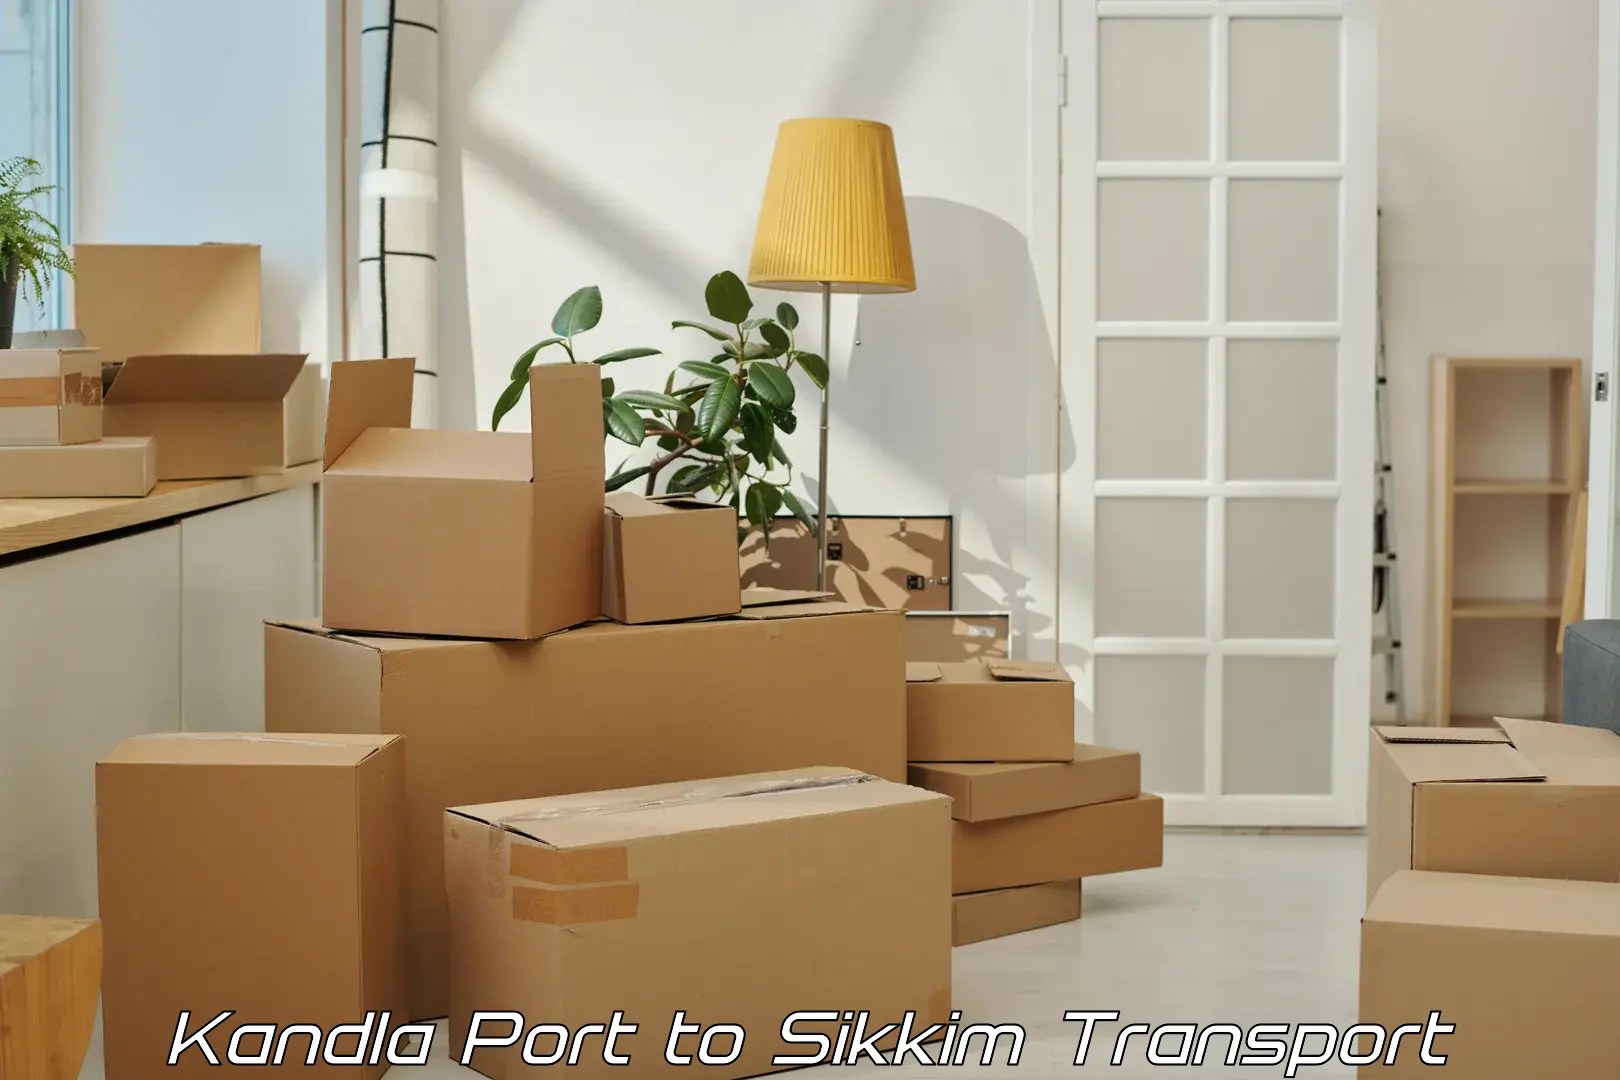 Two wheeler parcel service in Kandla Port to Sikkim